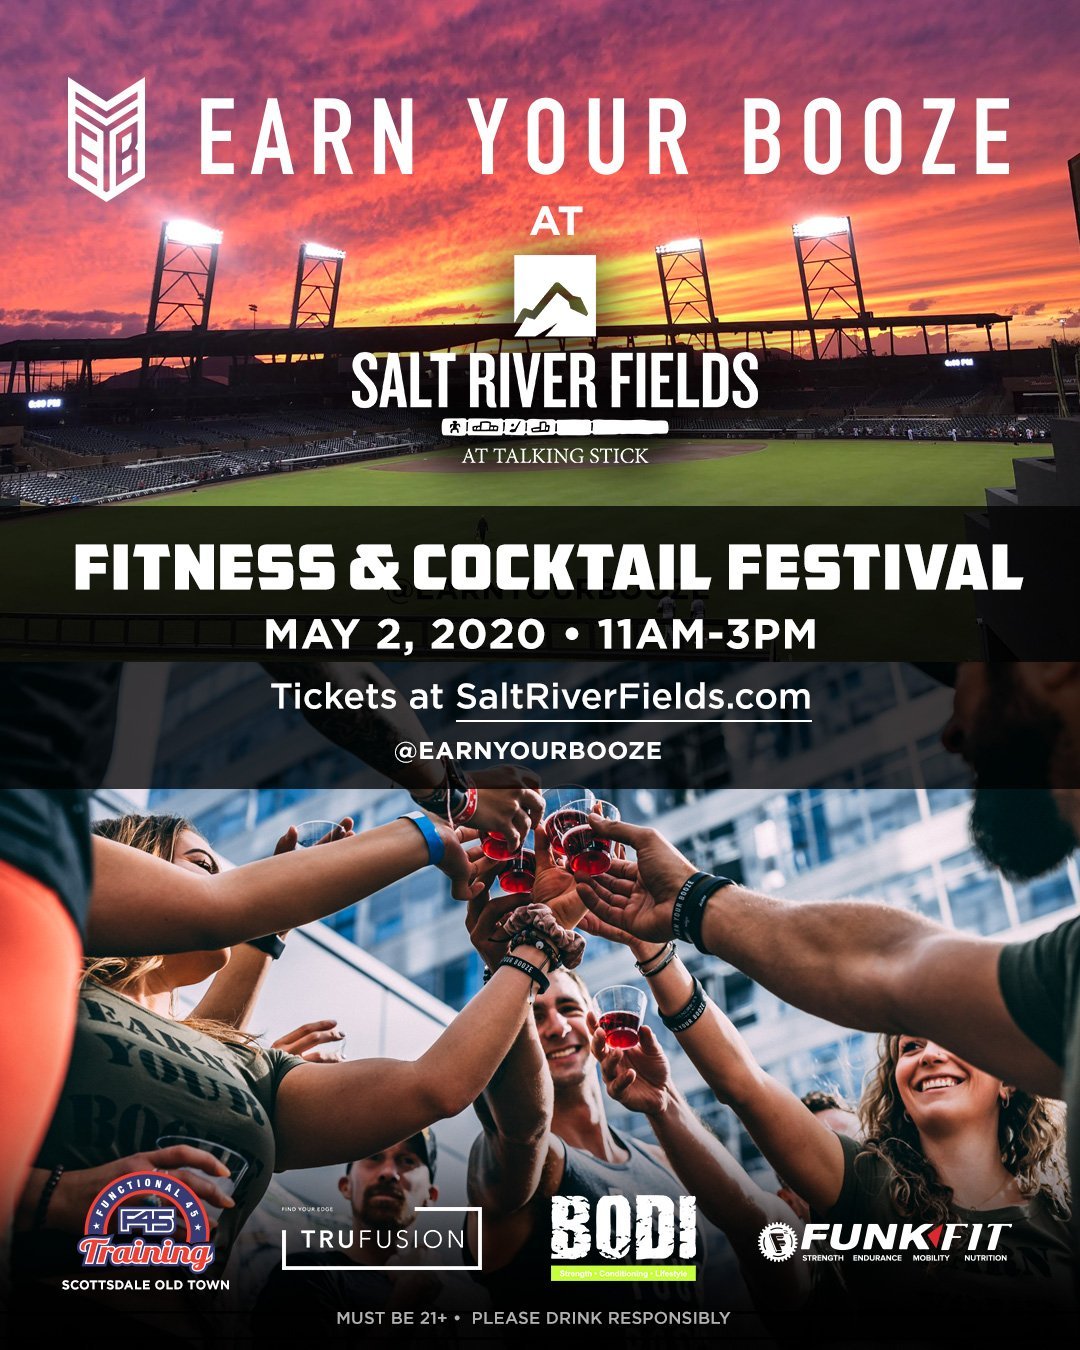 Fitness & Cocktail Festival at Salt River Fields | MAY 2ndEarn Your Booze